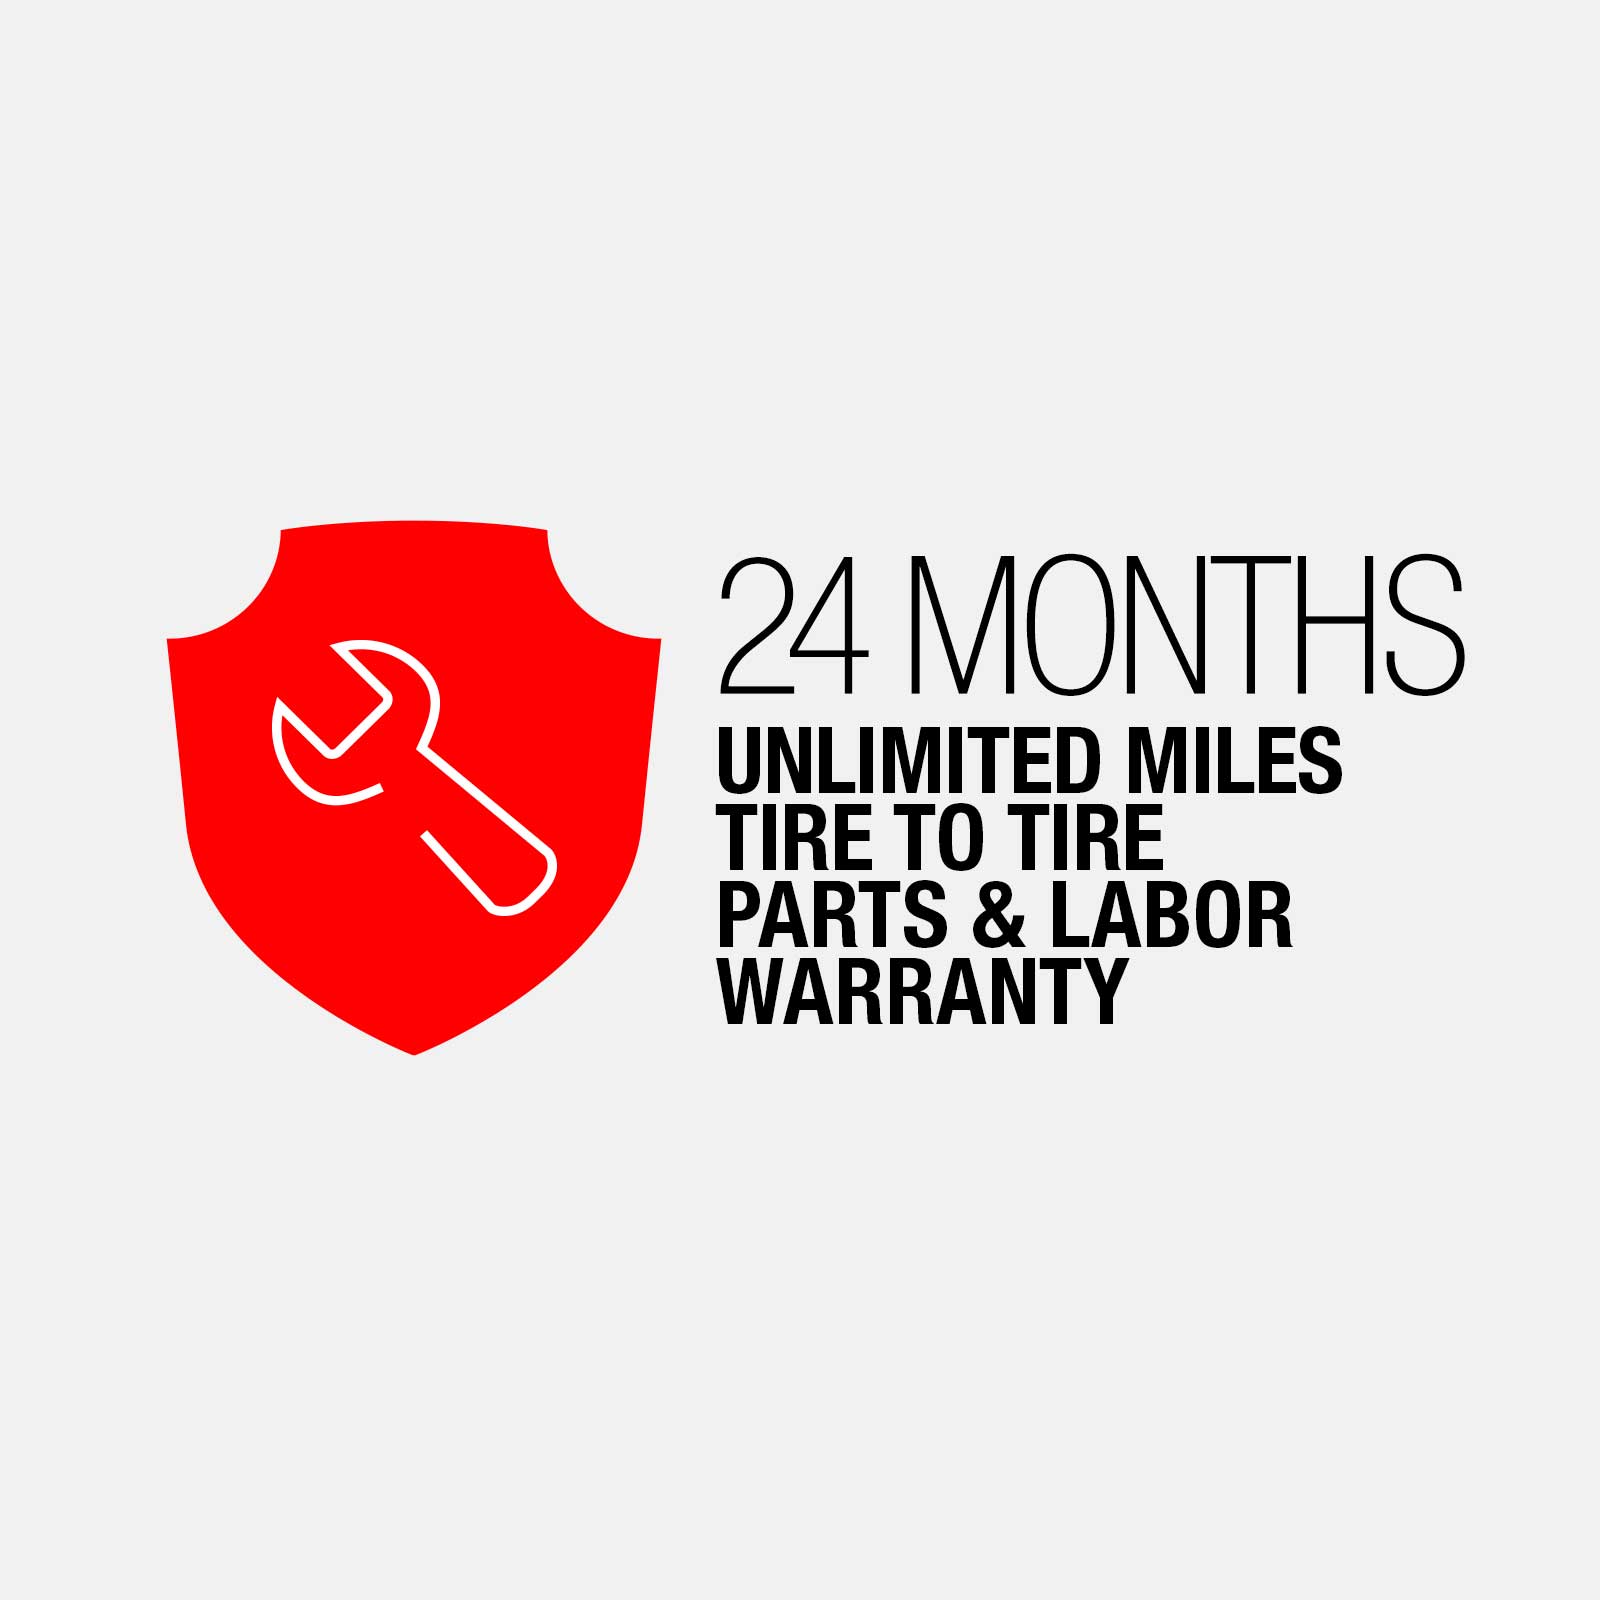 SYM New 24 Months Warranty - Unlimited Miles with Tire to Tire Parts and Labor Warranty Assurance.